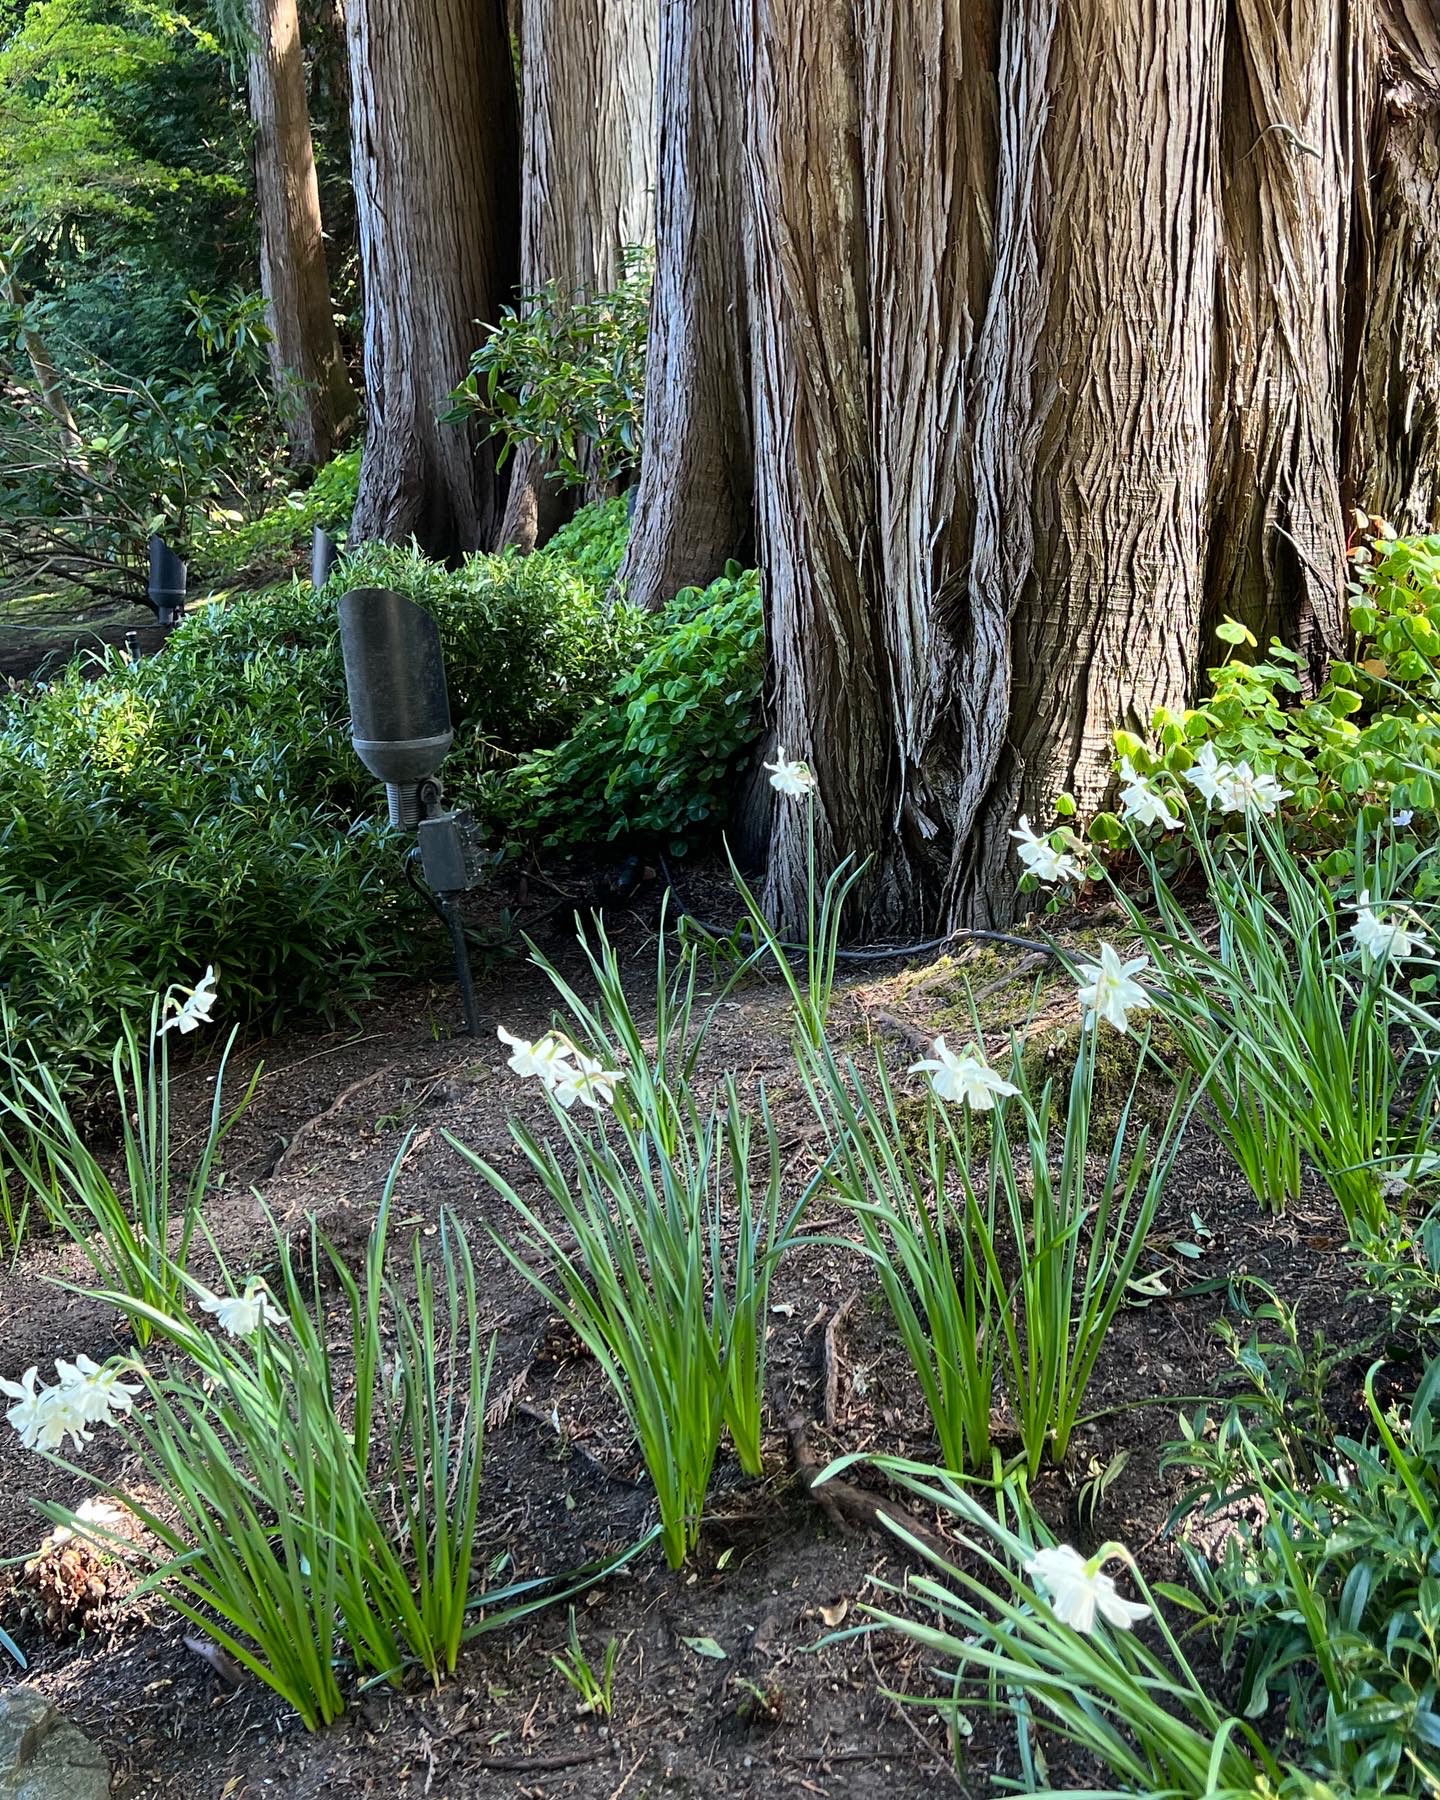 naturalistic planting of white daffodils next to large trees